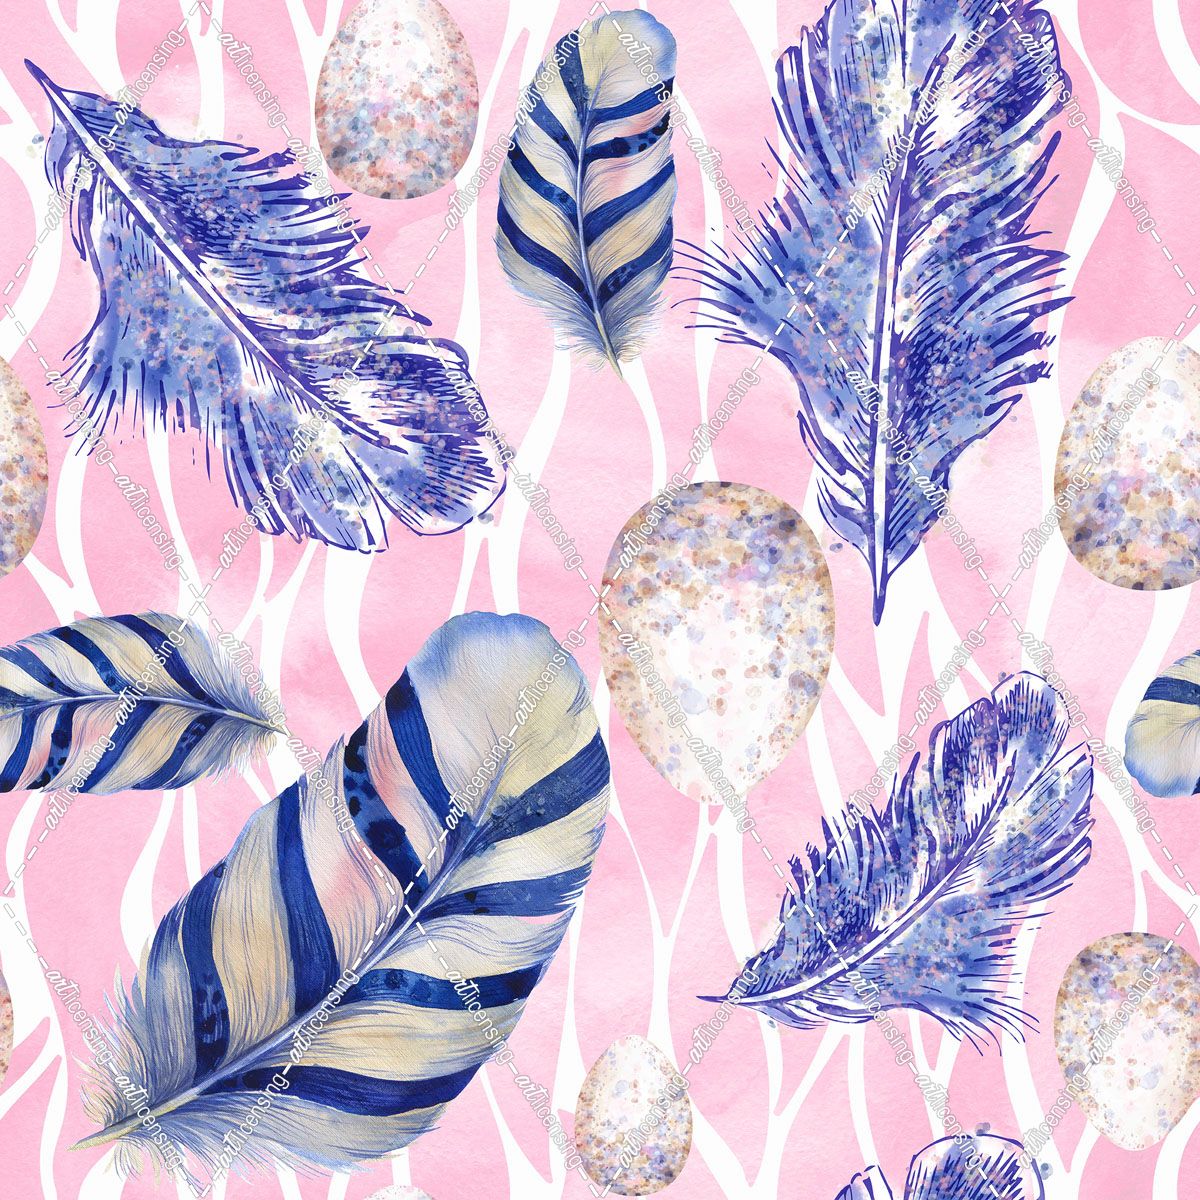 Feather & Egg Pattern I